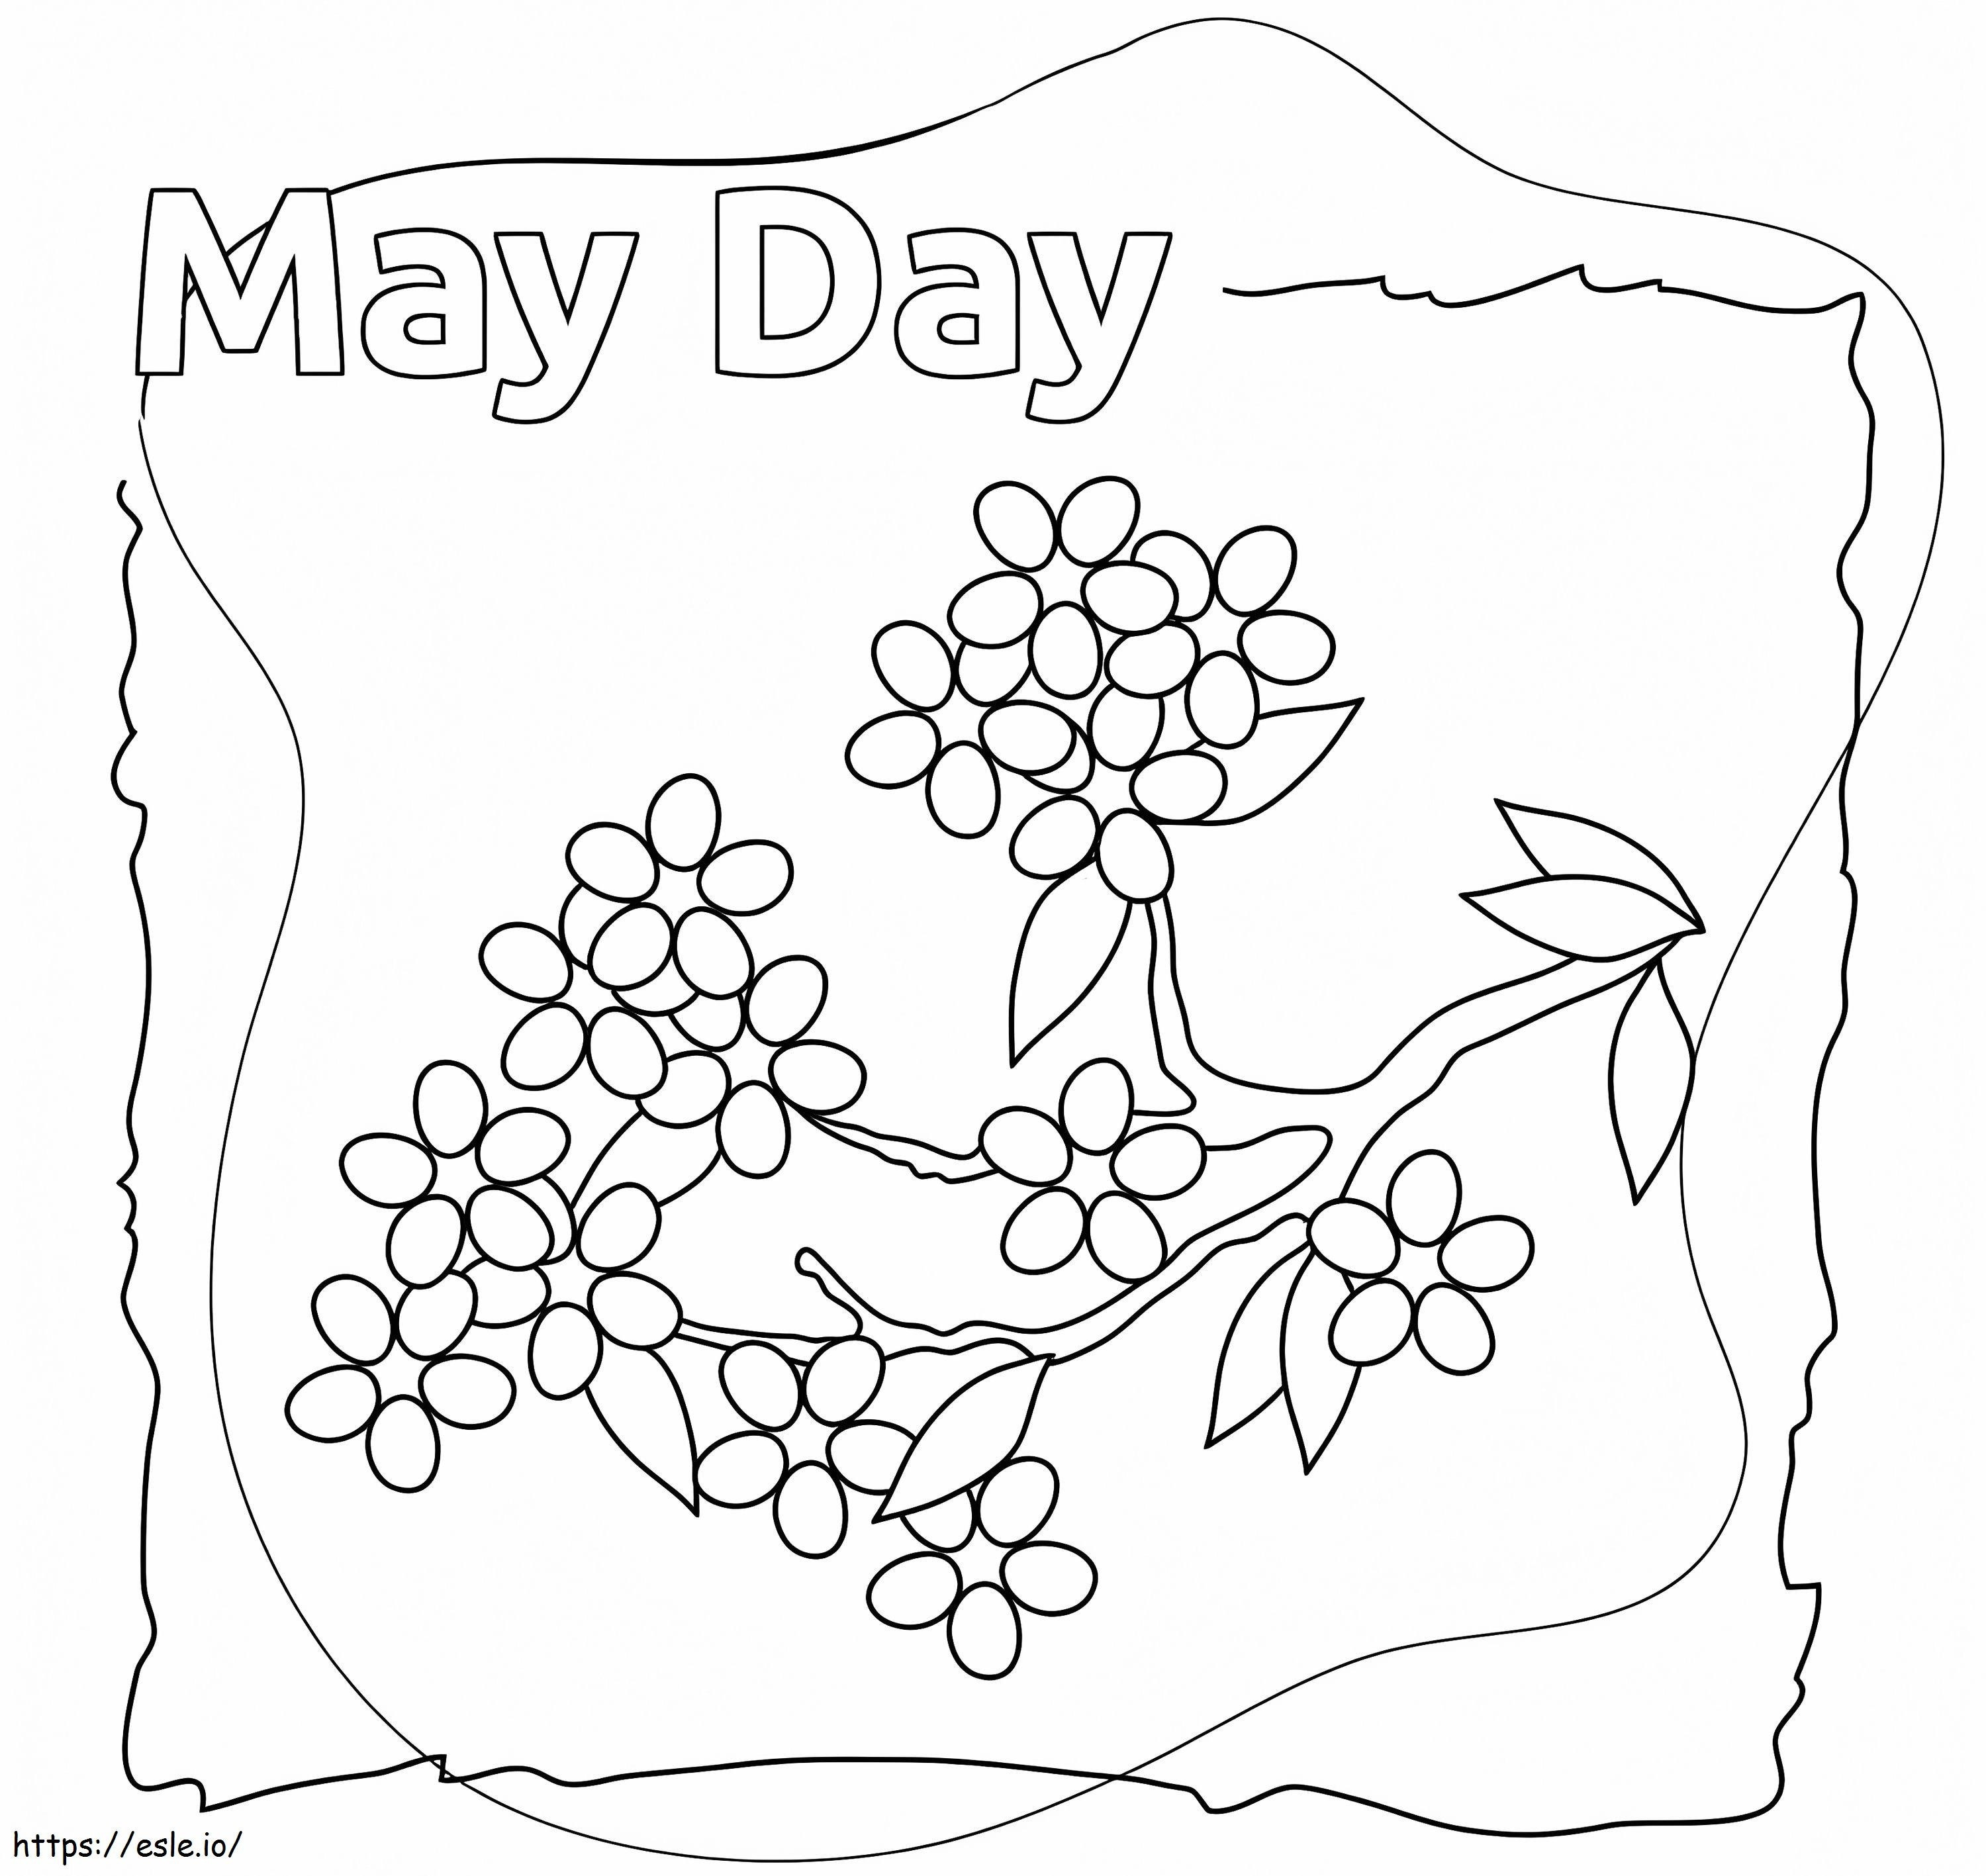 May Day 10 coloring page